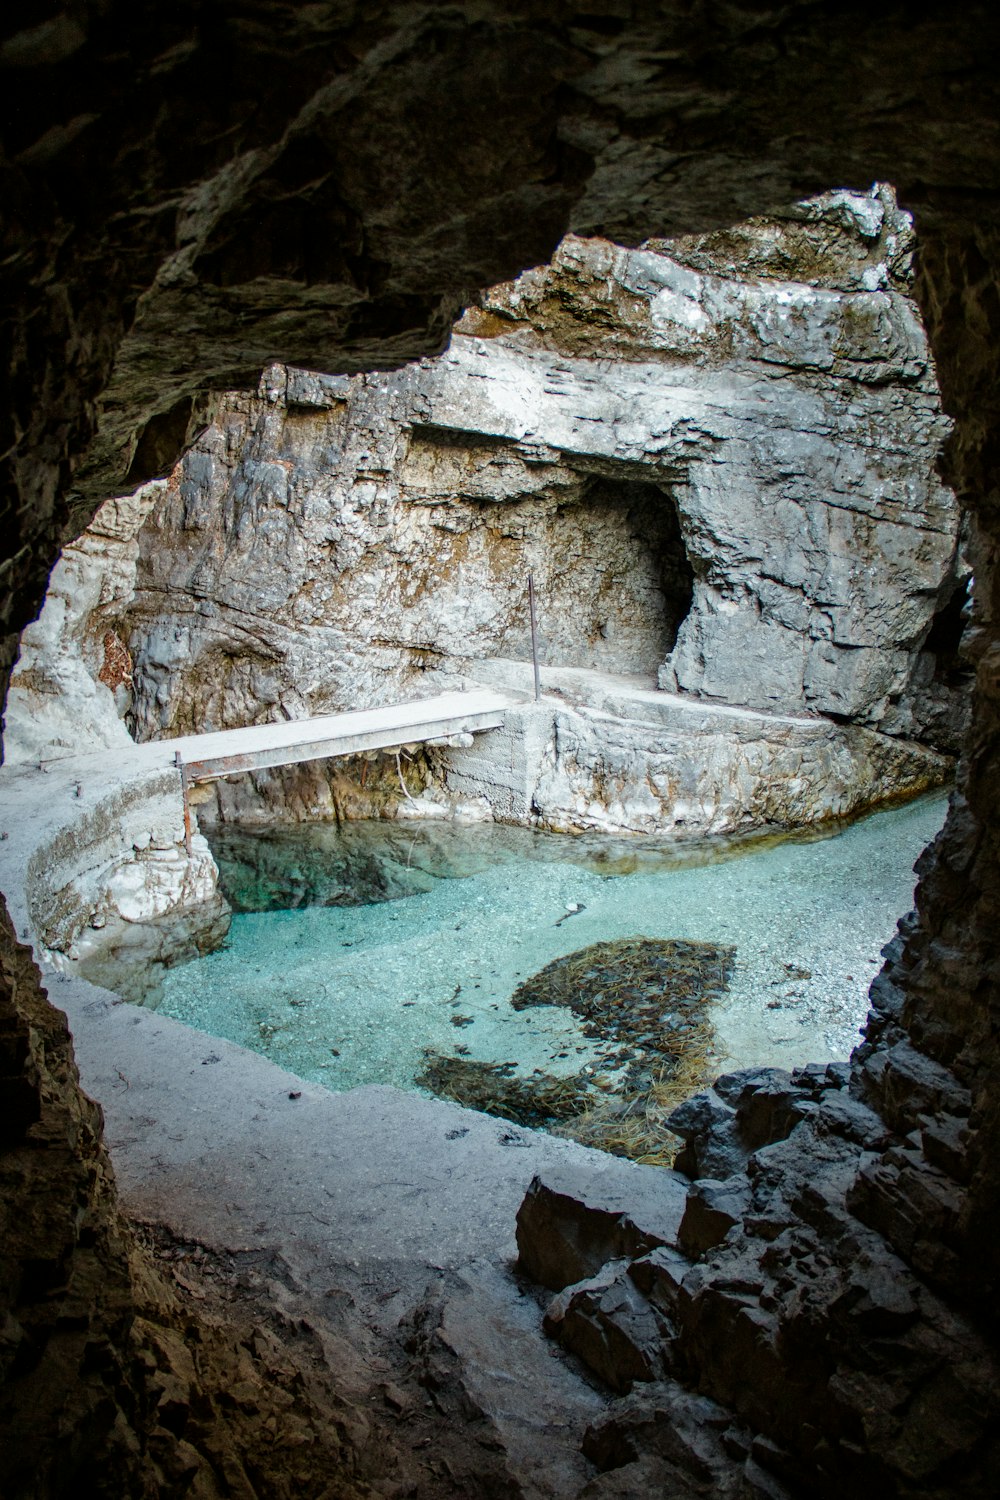 a pool in a cave with a bench in it